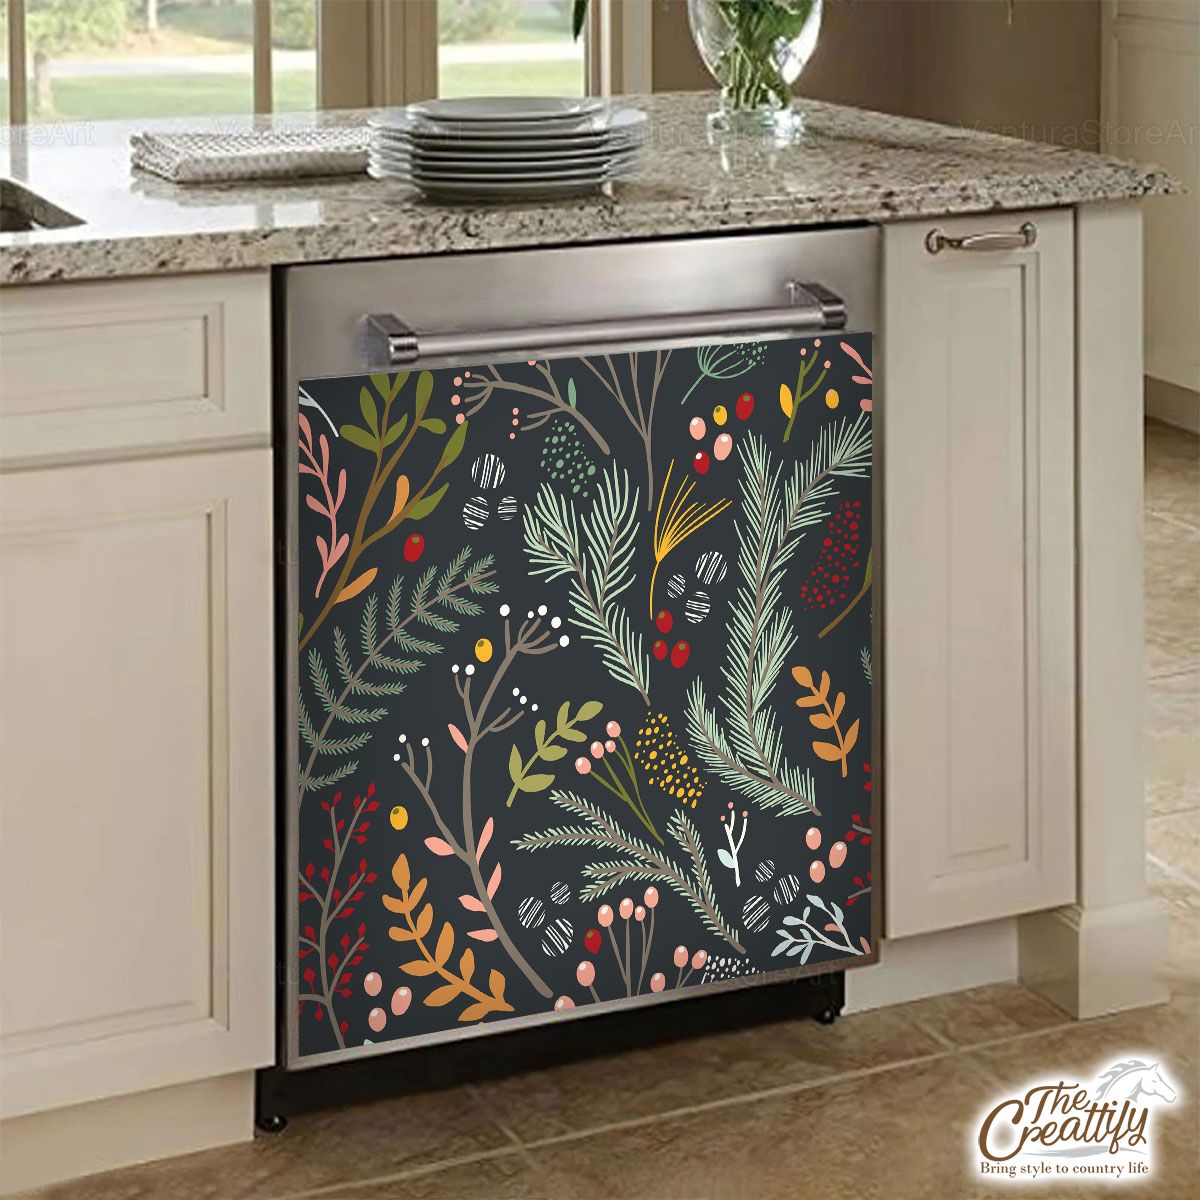 Pine Branch With Red Berries Pattern Dishwasher Cover